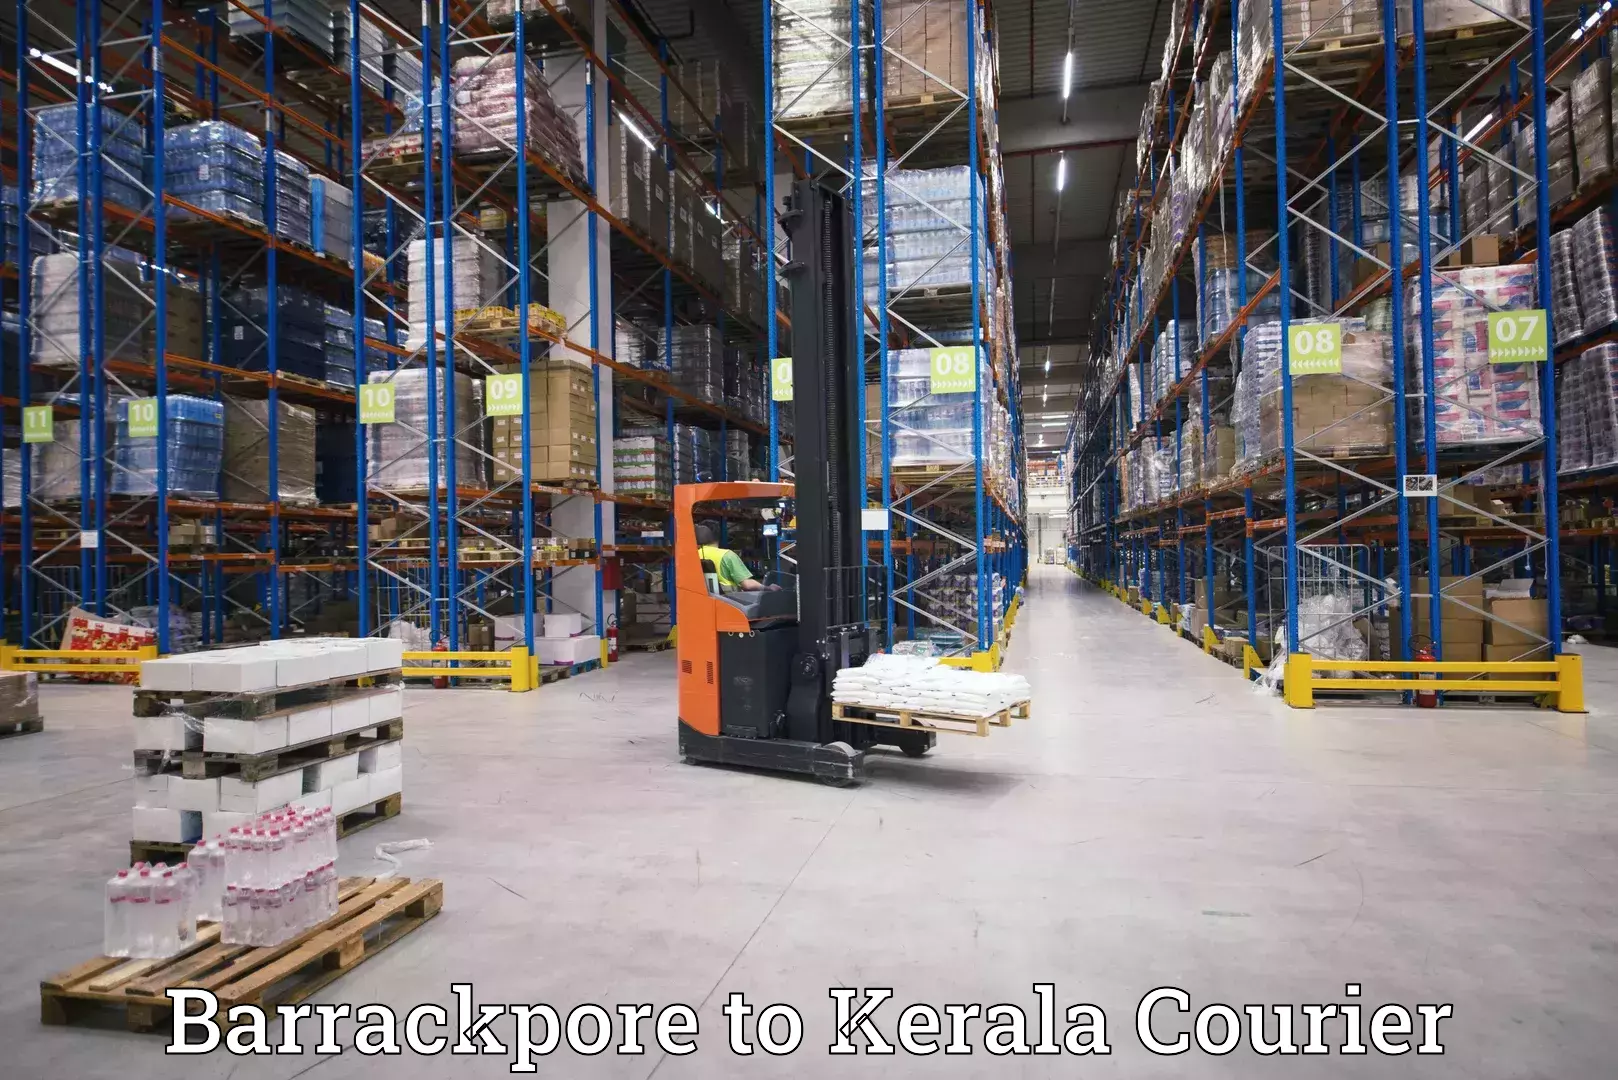 Express package delivery Barrackpore to Cochin Port Kochi